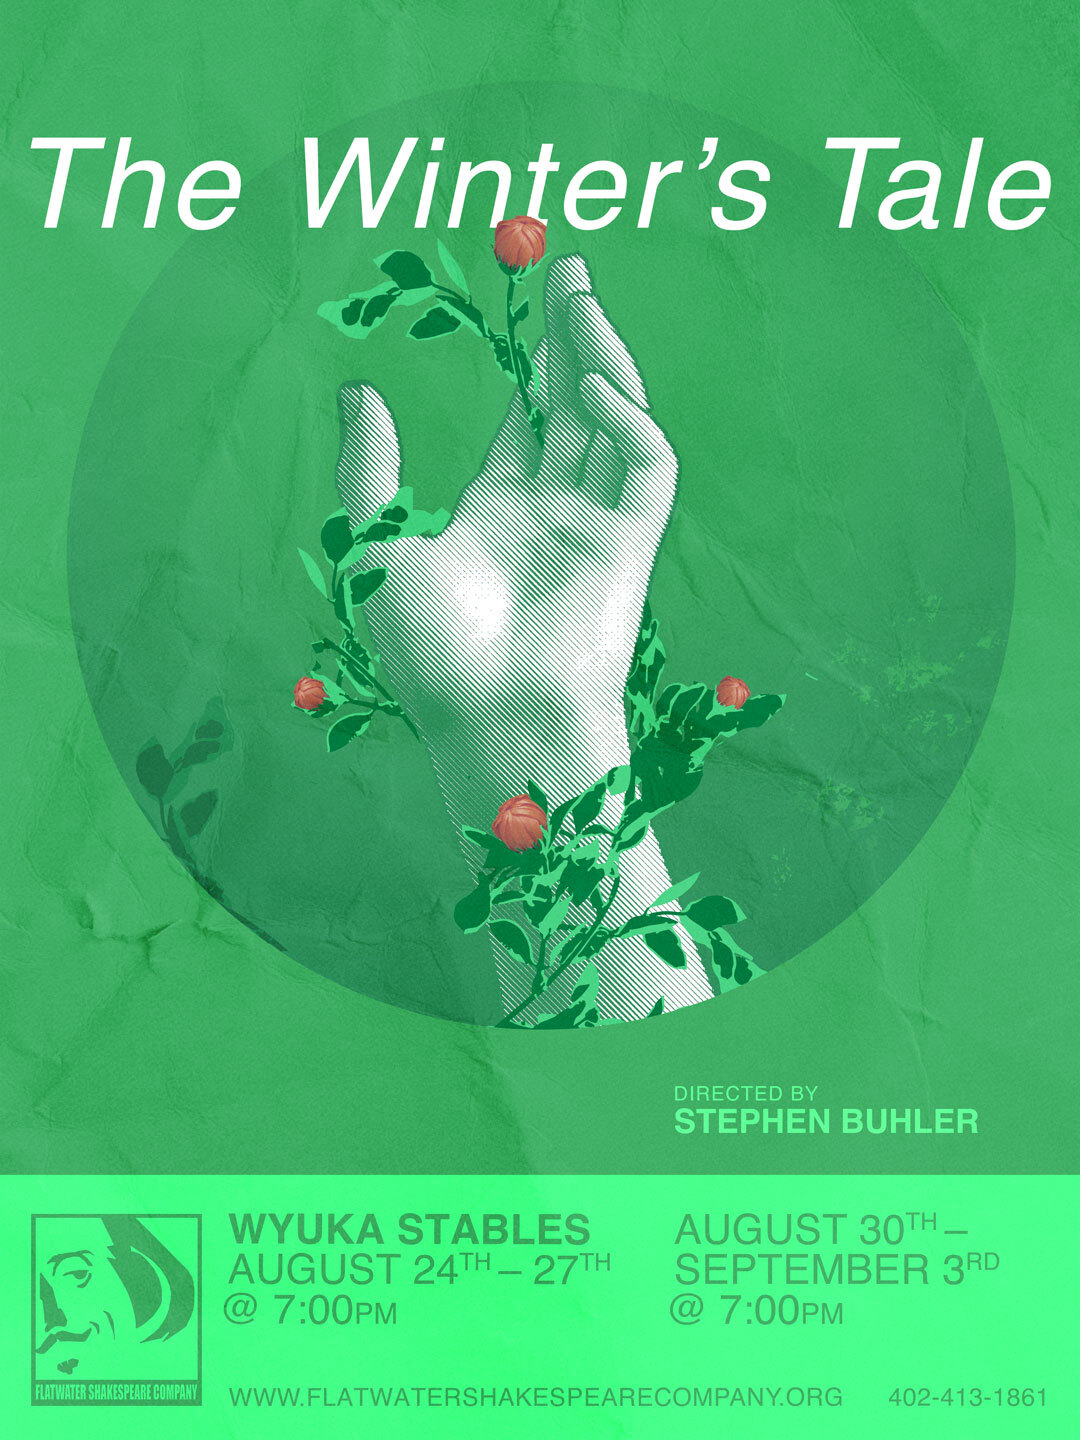 8/25 ADU - ADULT: Friday. August 25, 2023 | 7:00 p.m. - 10:00 p.m. CST | Wyuka Stables (The Winter's Tale)